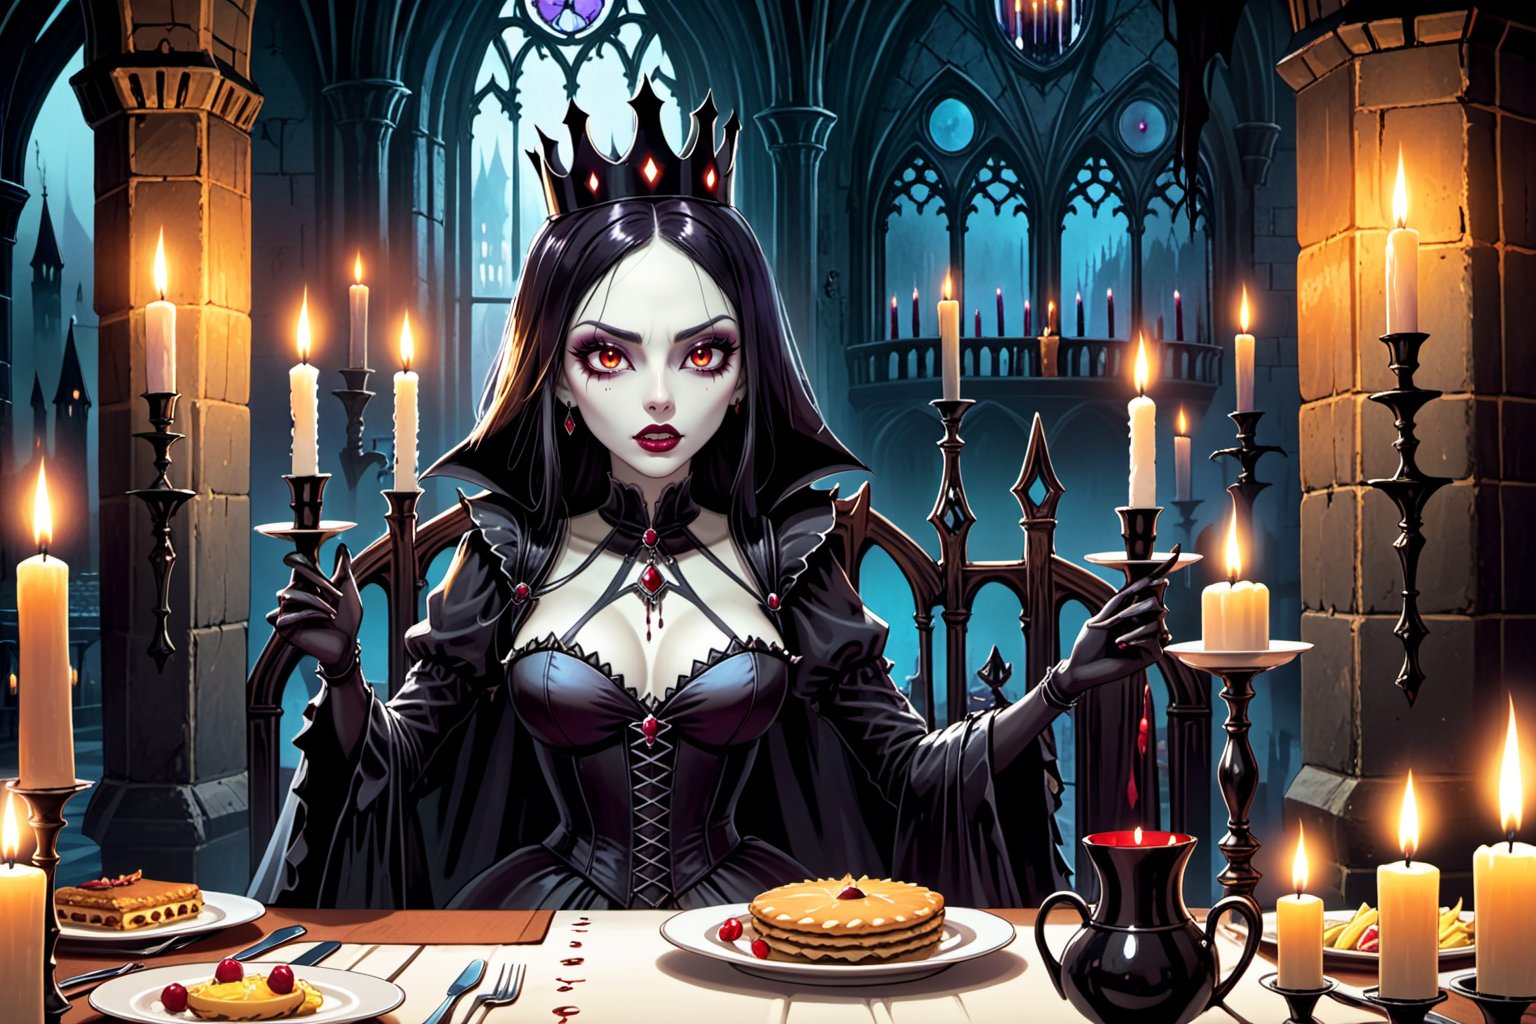  A hauntingly beautiful undead queen monster has diner with her monsters guests in a gothic castle. candles light.